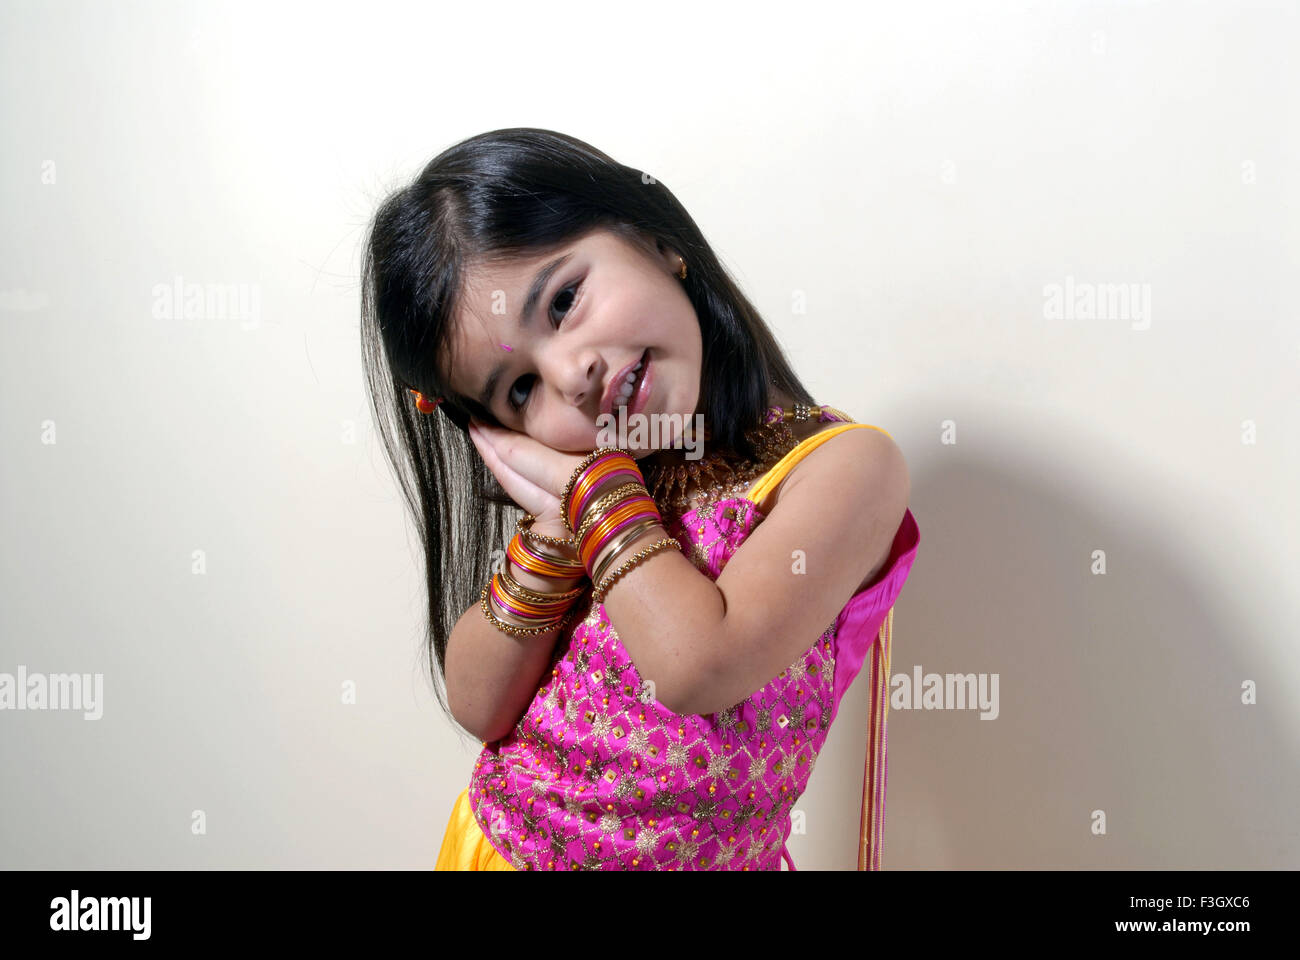 Four years old girl showing sleeping pose MR#556 Stock Photo